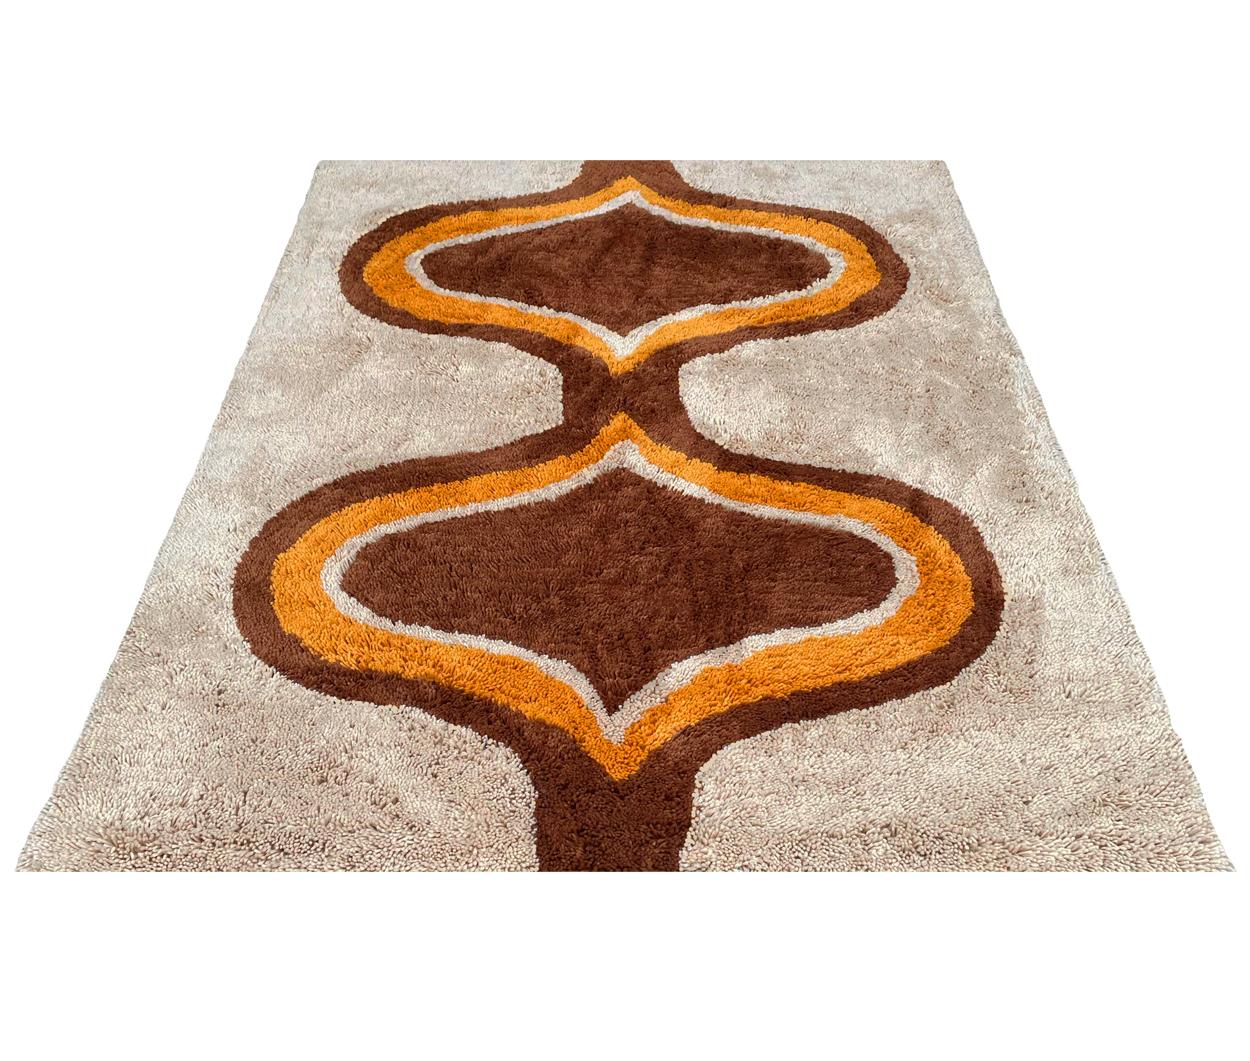 We are proud to offer these brand new, finely crafted, high quality designer shag rugs. These are truly inspired by the classic Scandinavian rug designs of the 1950’s and 1960’s. The entire look and feel were made to bring you back in time, from the